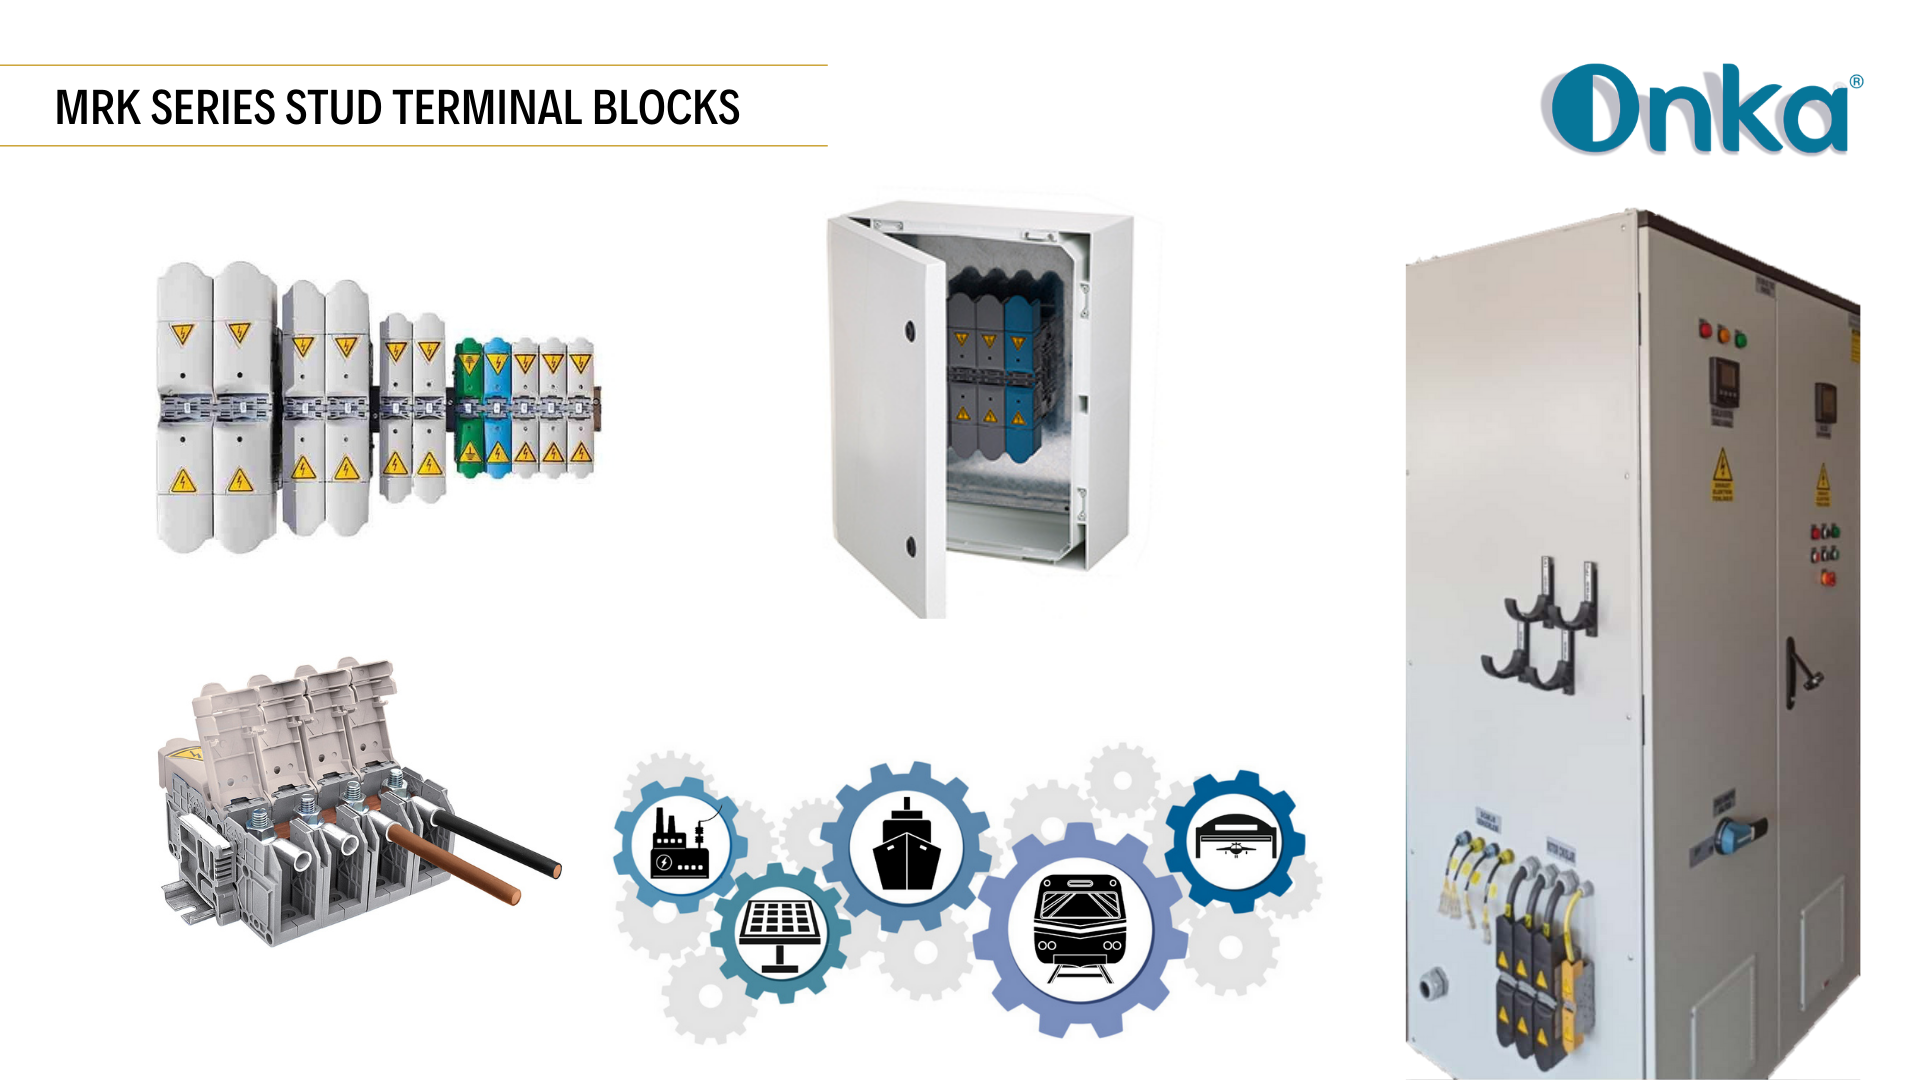 Discover our MRK Series Stud Terminal Blocks